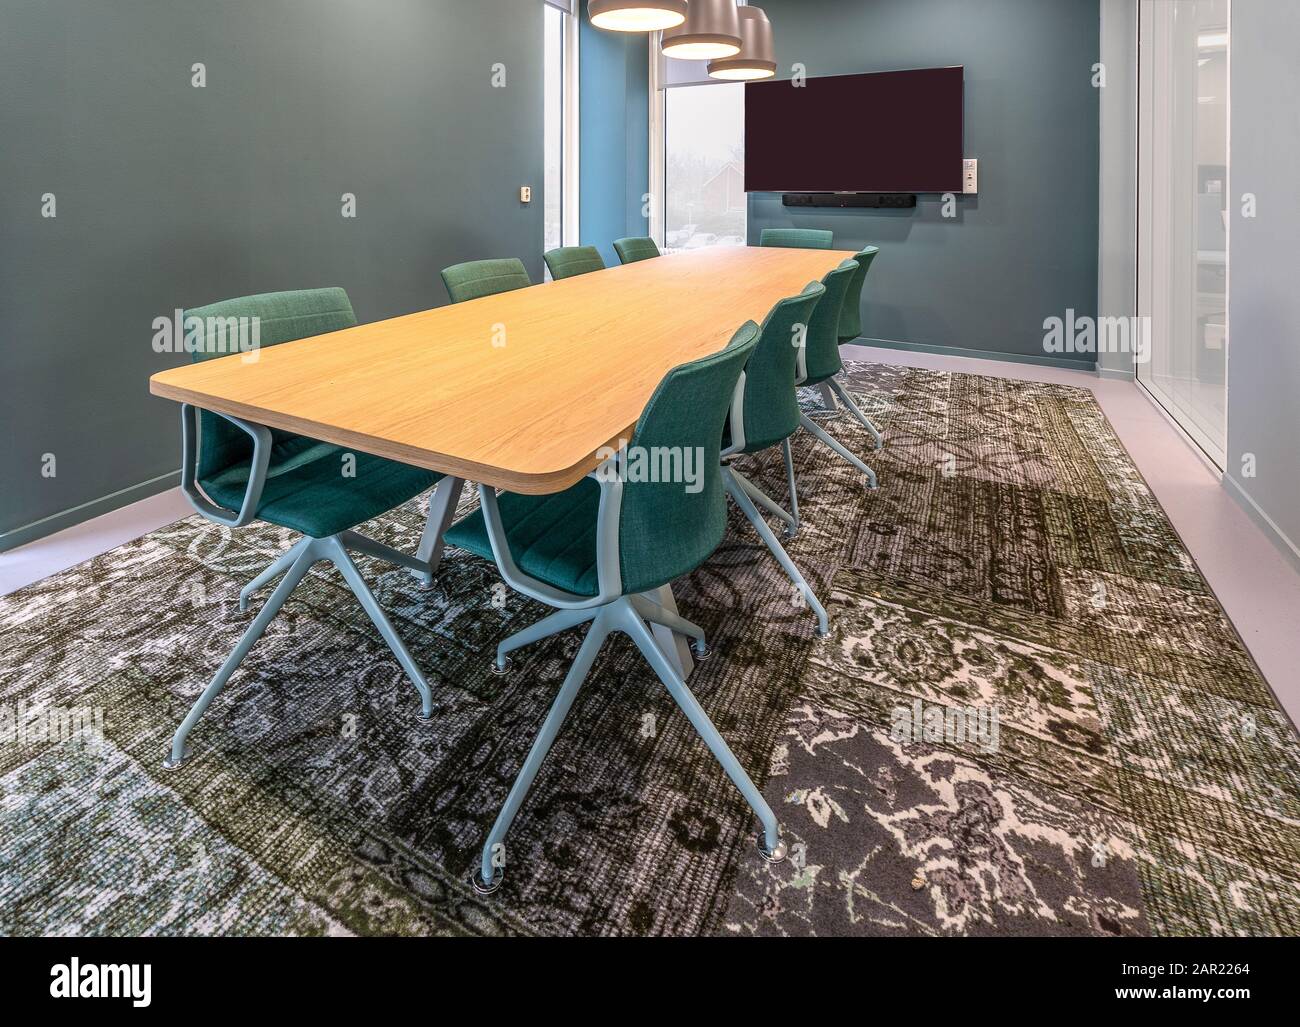 Chairs put next to a table in a room with a patterned carpet Stock Photo